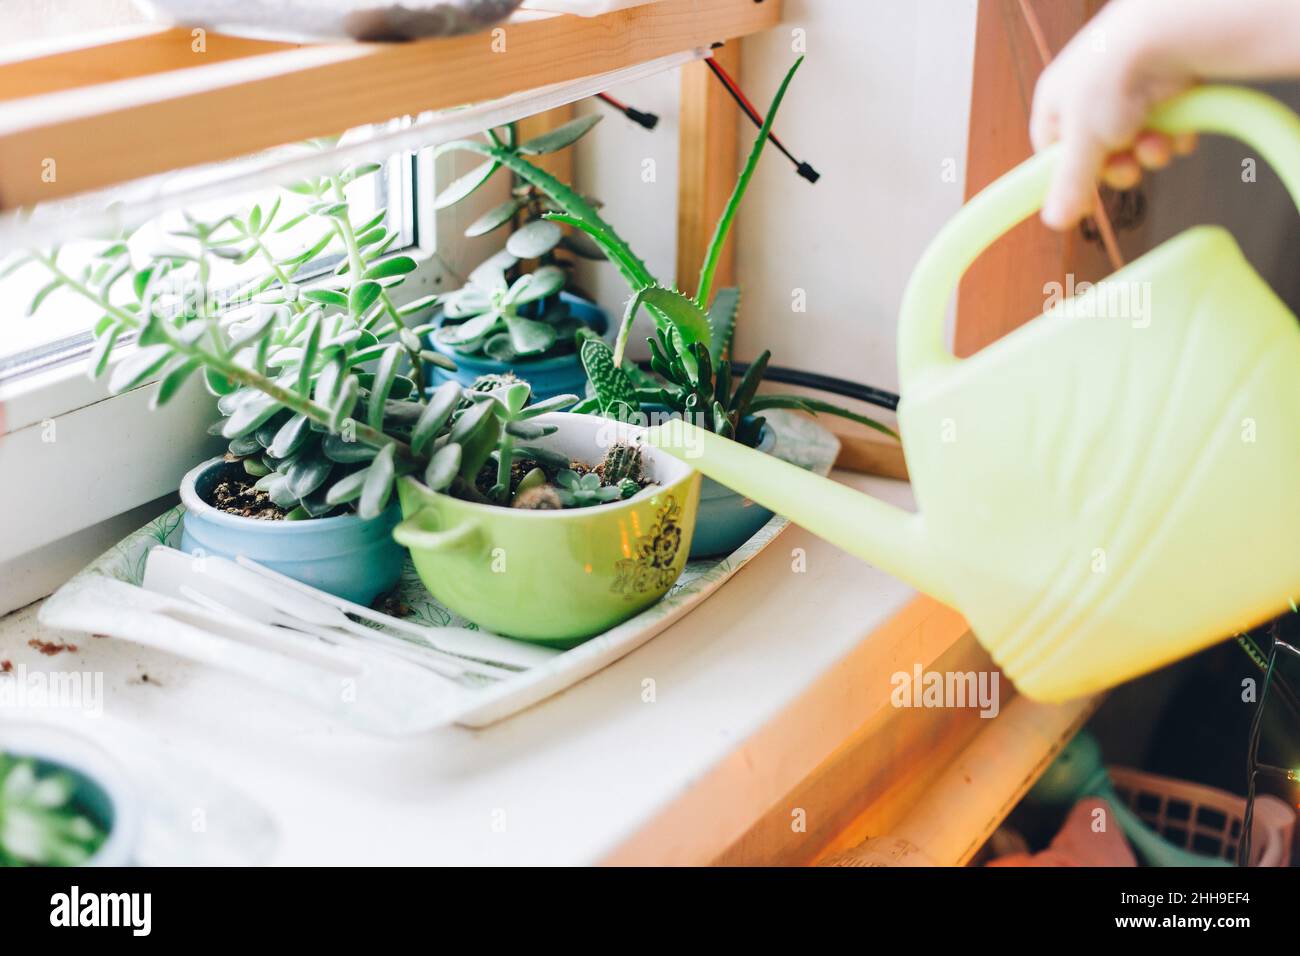 Watering Plant In Container On Balcony Garden Stock Photo